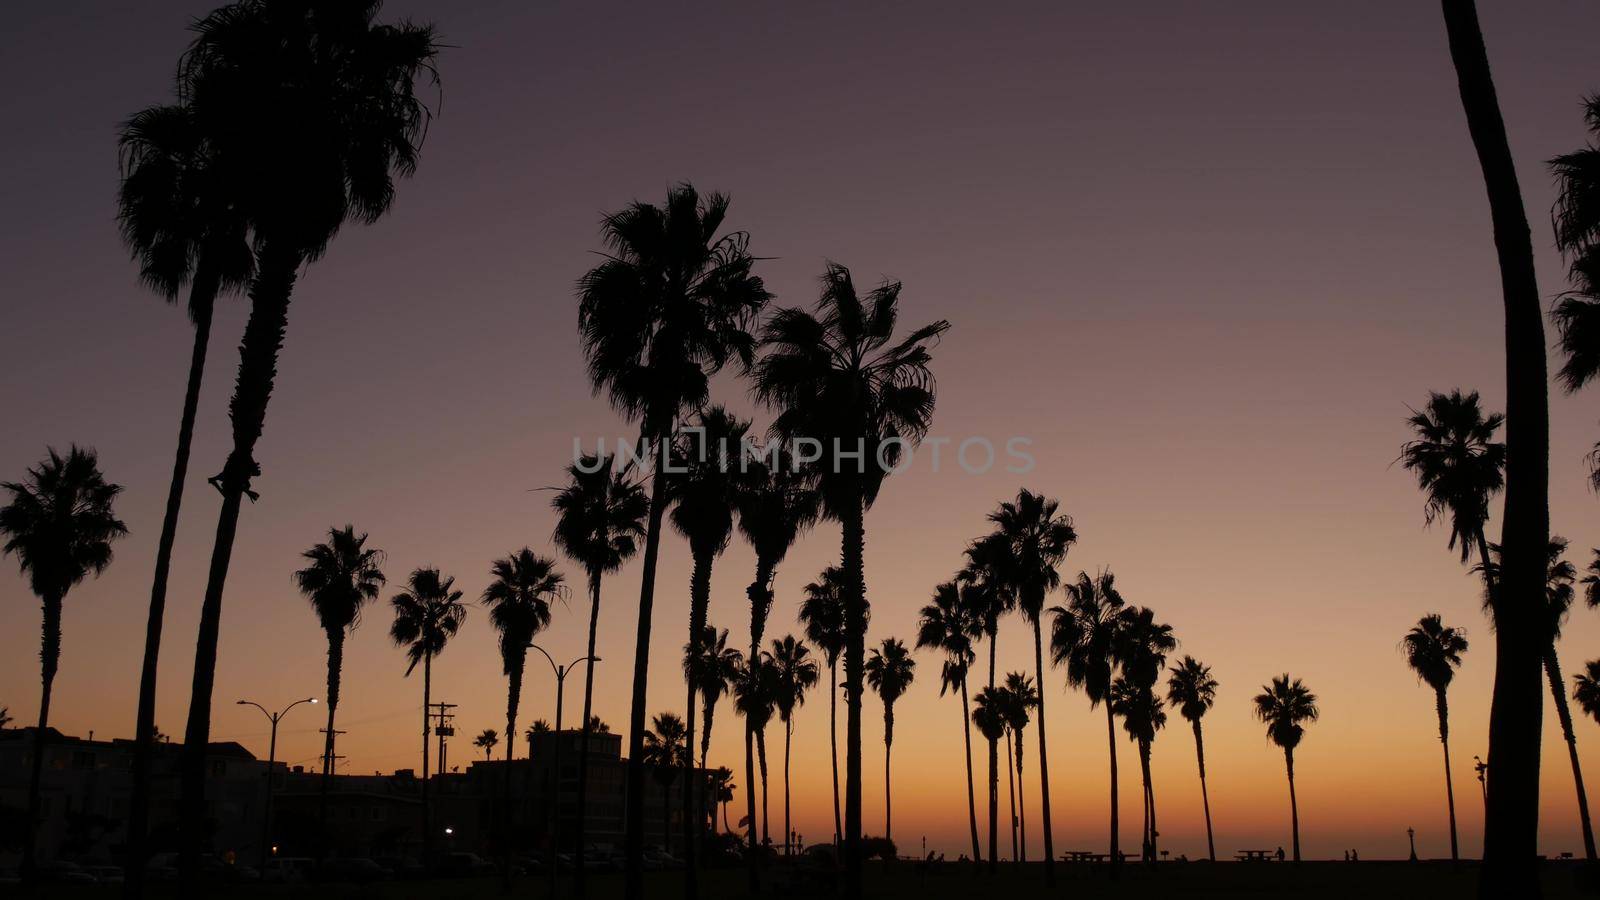 Silhouettes palm trees and people walk on beach at sunset, California coast, USA by DogoraSun